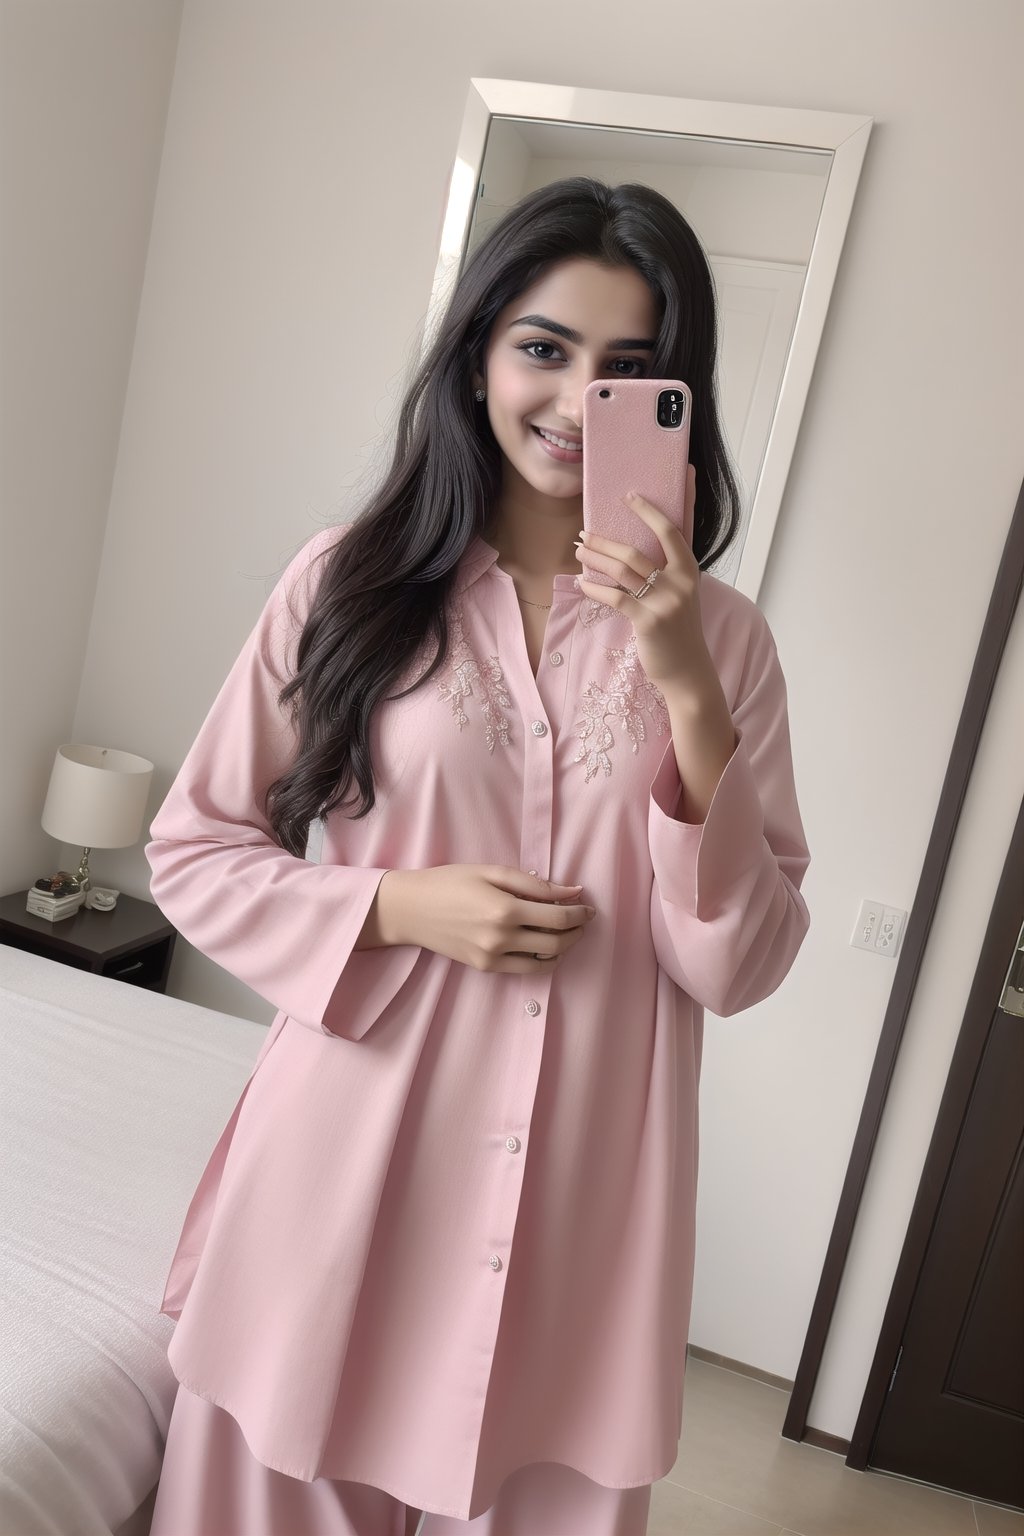  A stunning 18-year-old pakistani beauty,,small tits taking a mirror selfie in his bed room with piercing black eyes and a radiant smile, captured in hyper-realistic detail. She is dressed in a stylish pink and red kameez shalwar, .